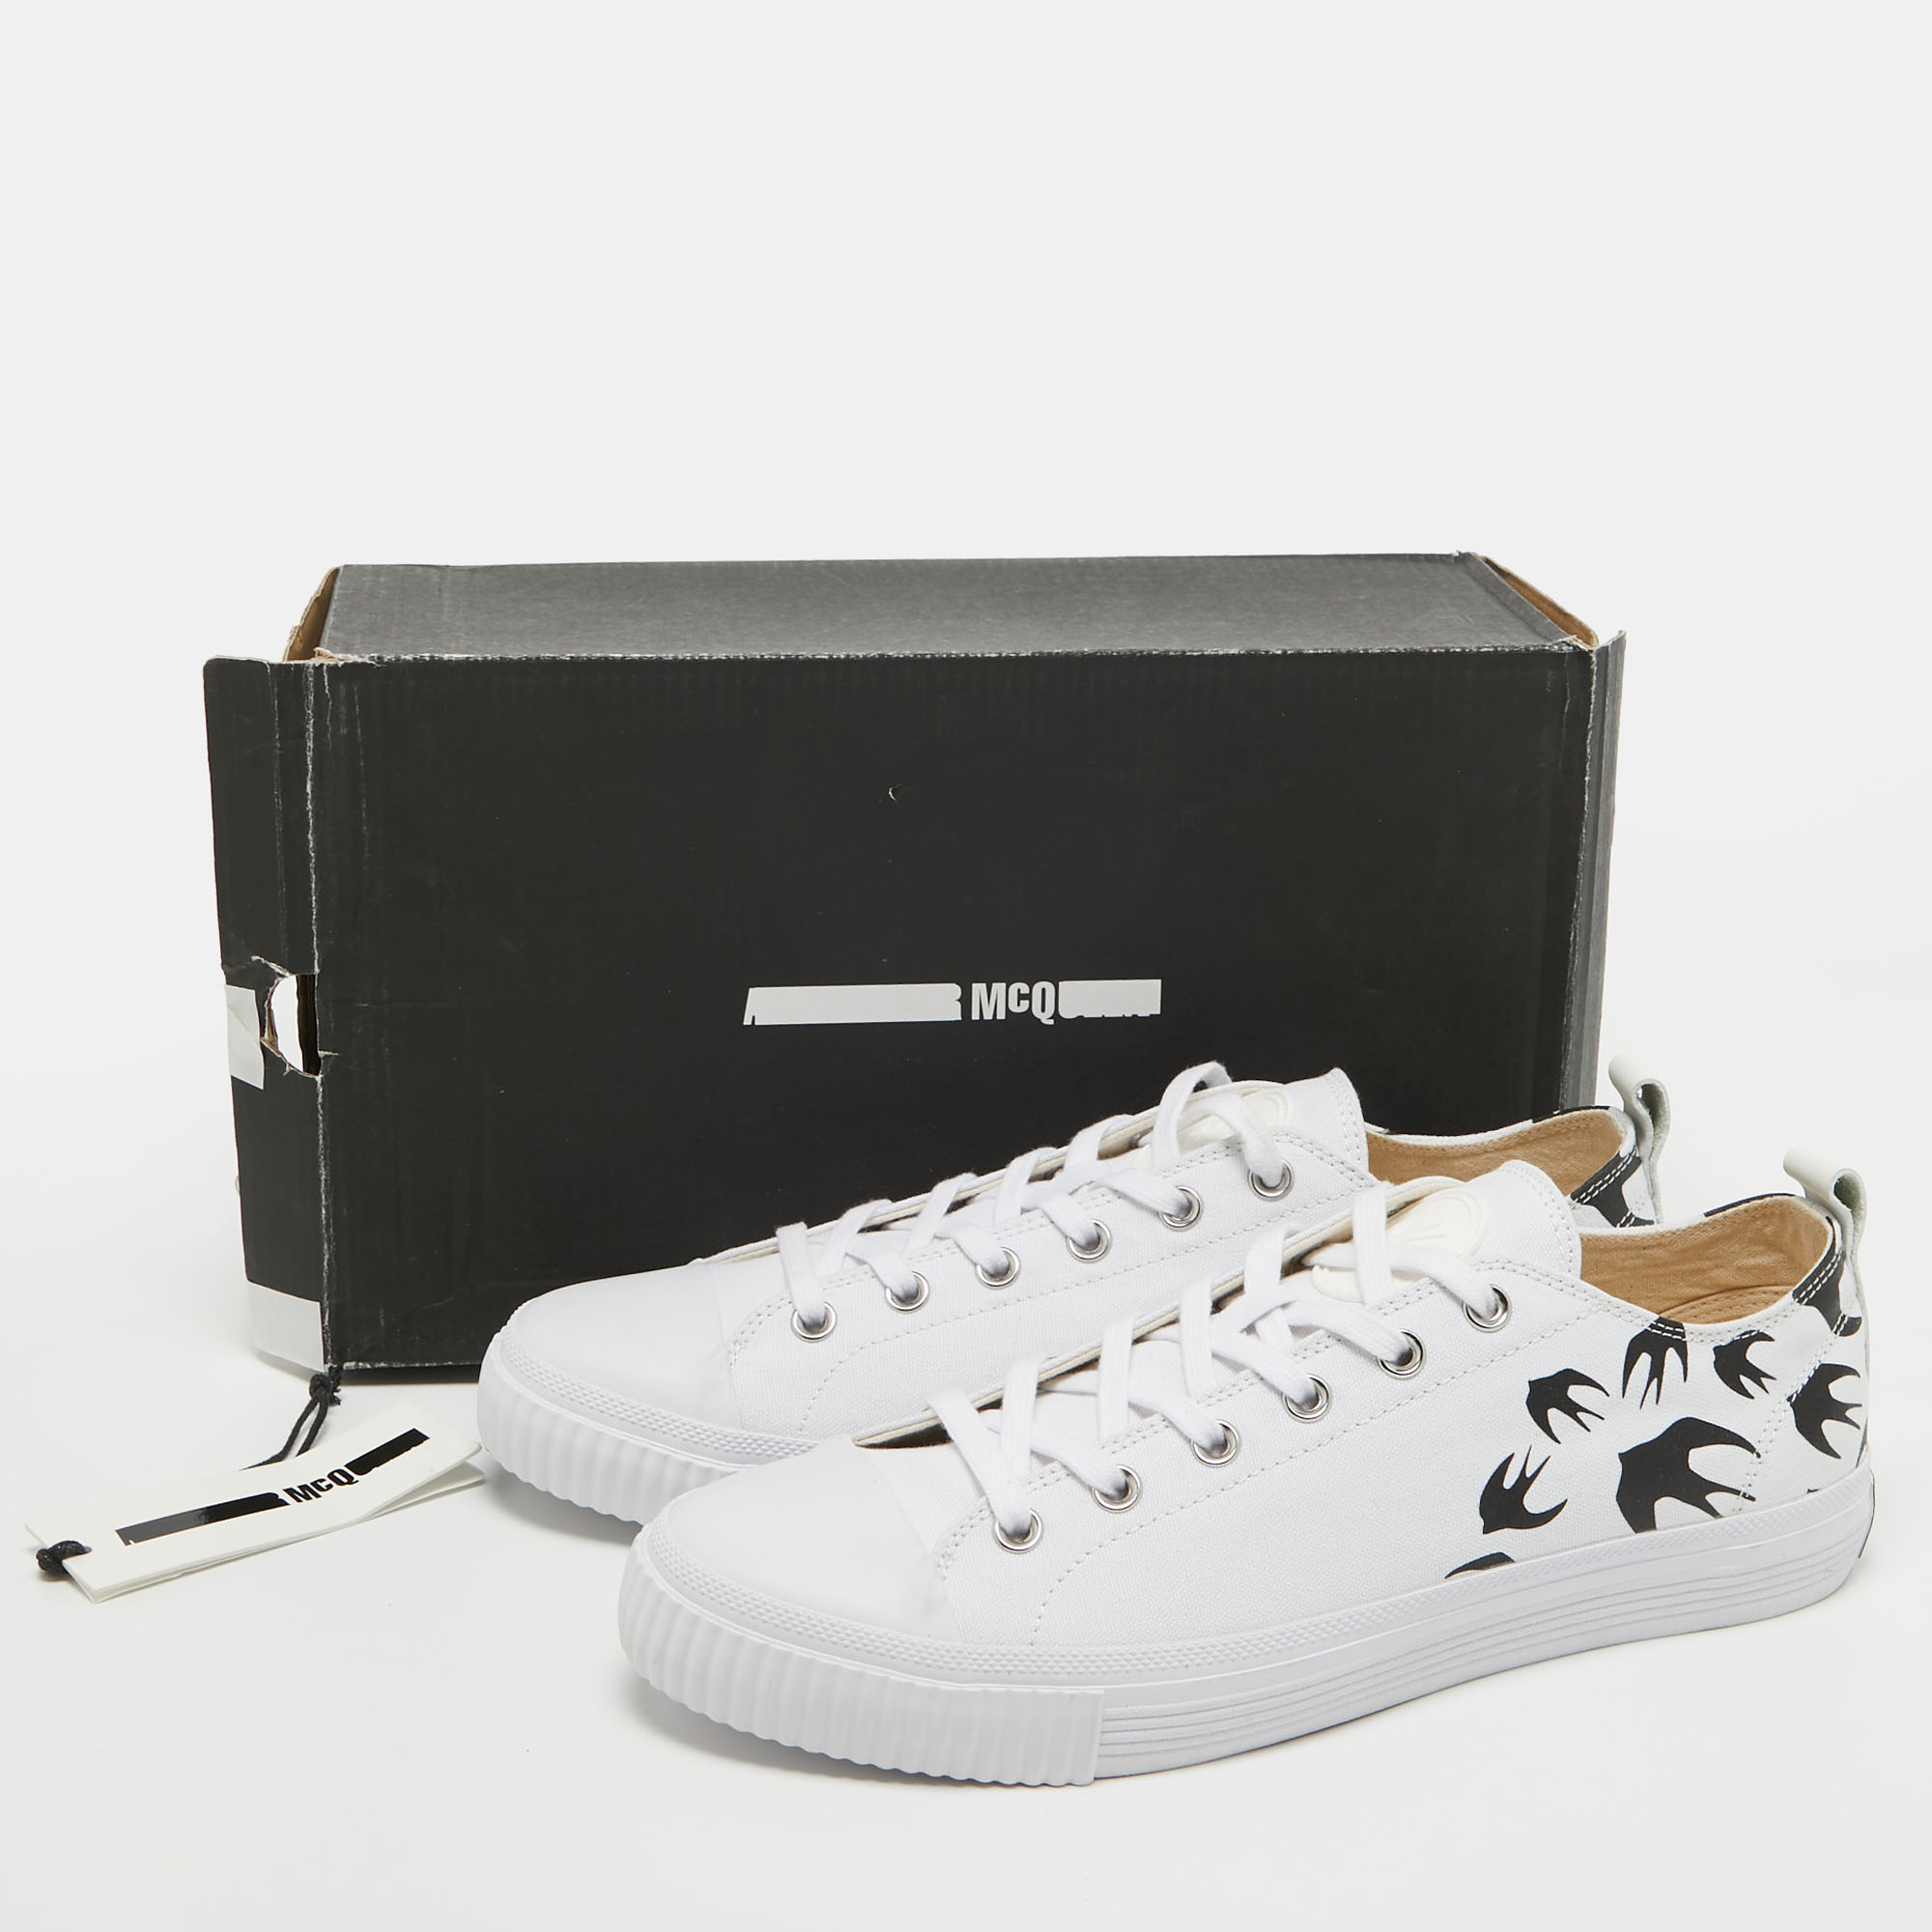 McQ By Alexander McQueen White Canvas Swallow Sneakers Size 44